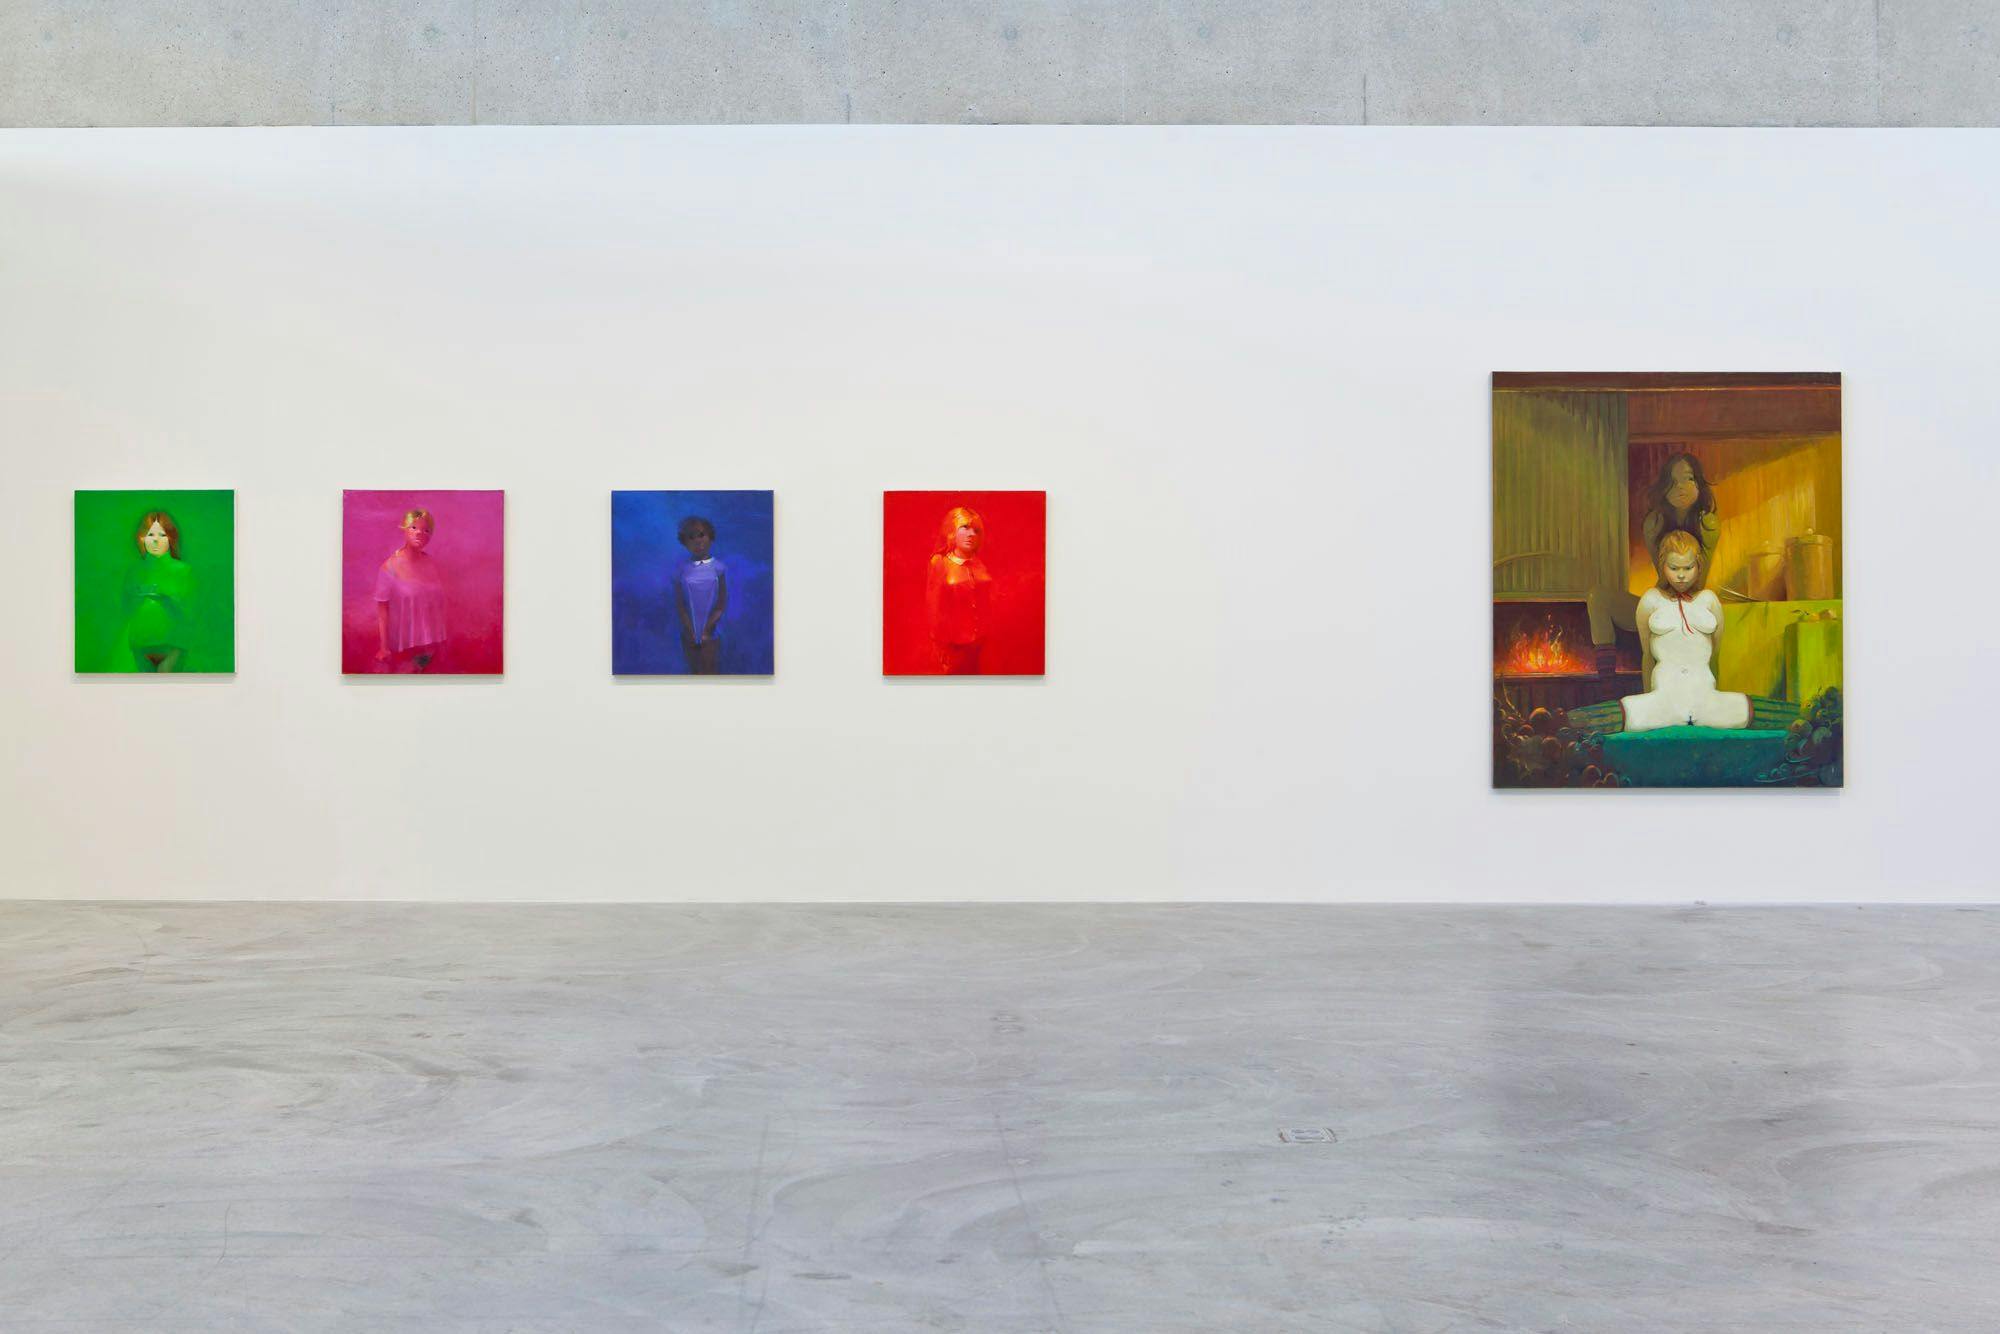 Installation view of The Brood at the Contemporary Art Museum, St. Louis, dated 2015.